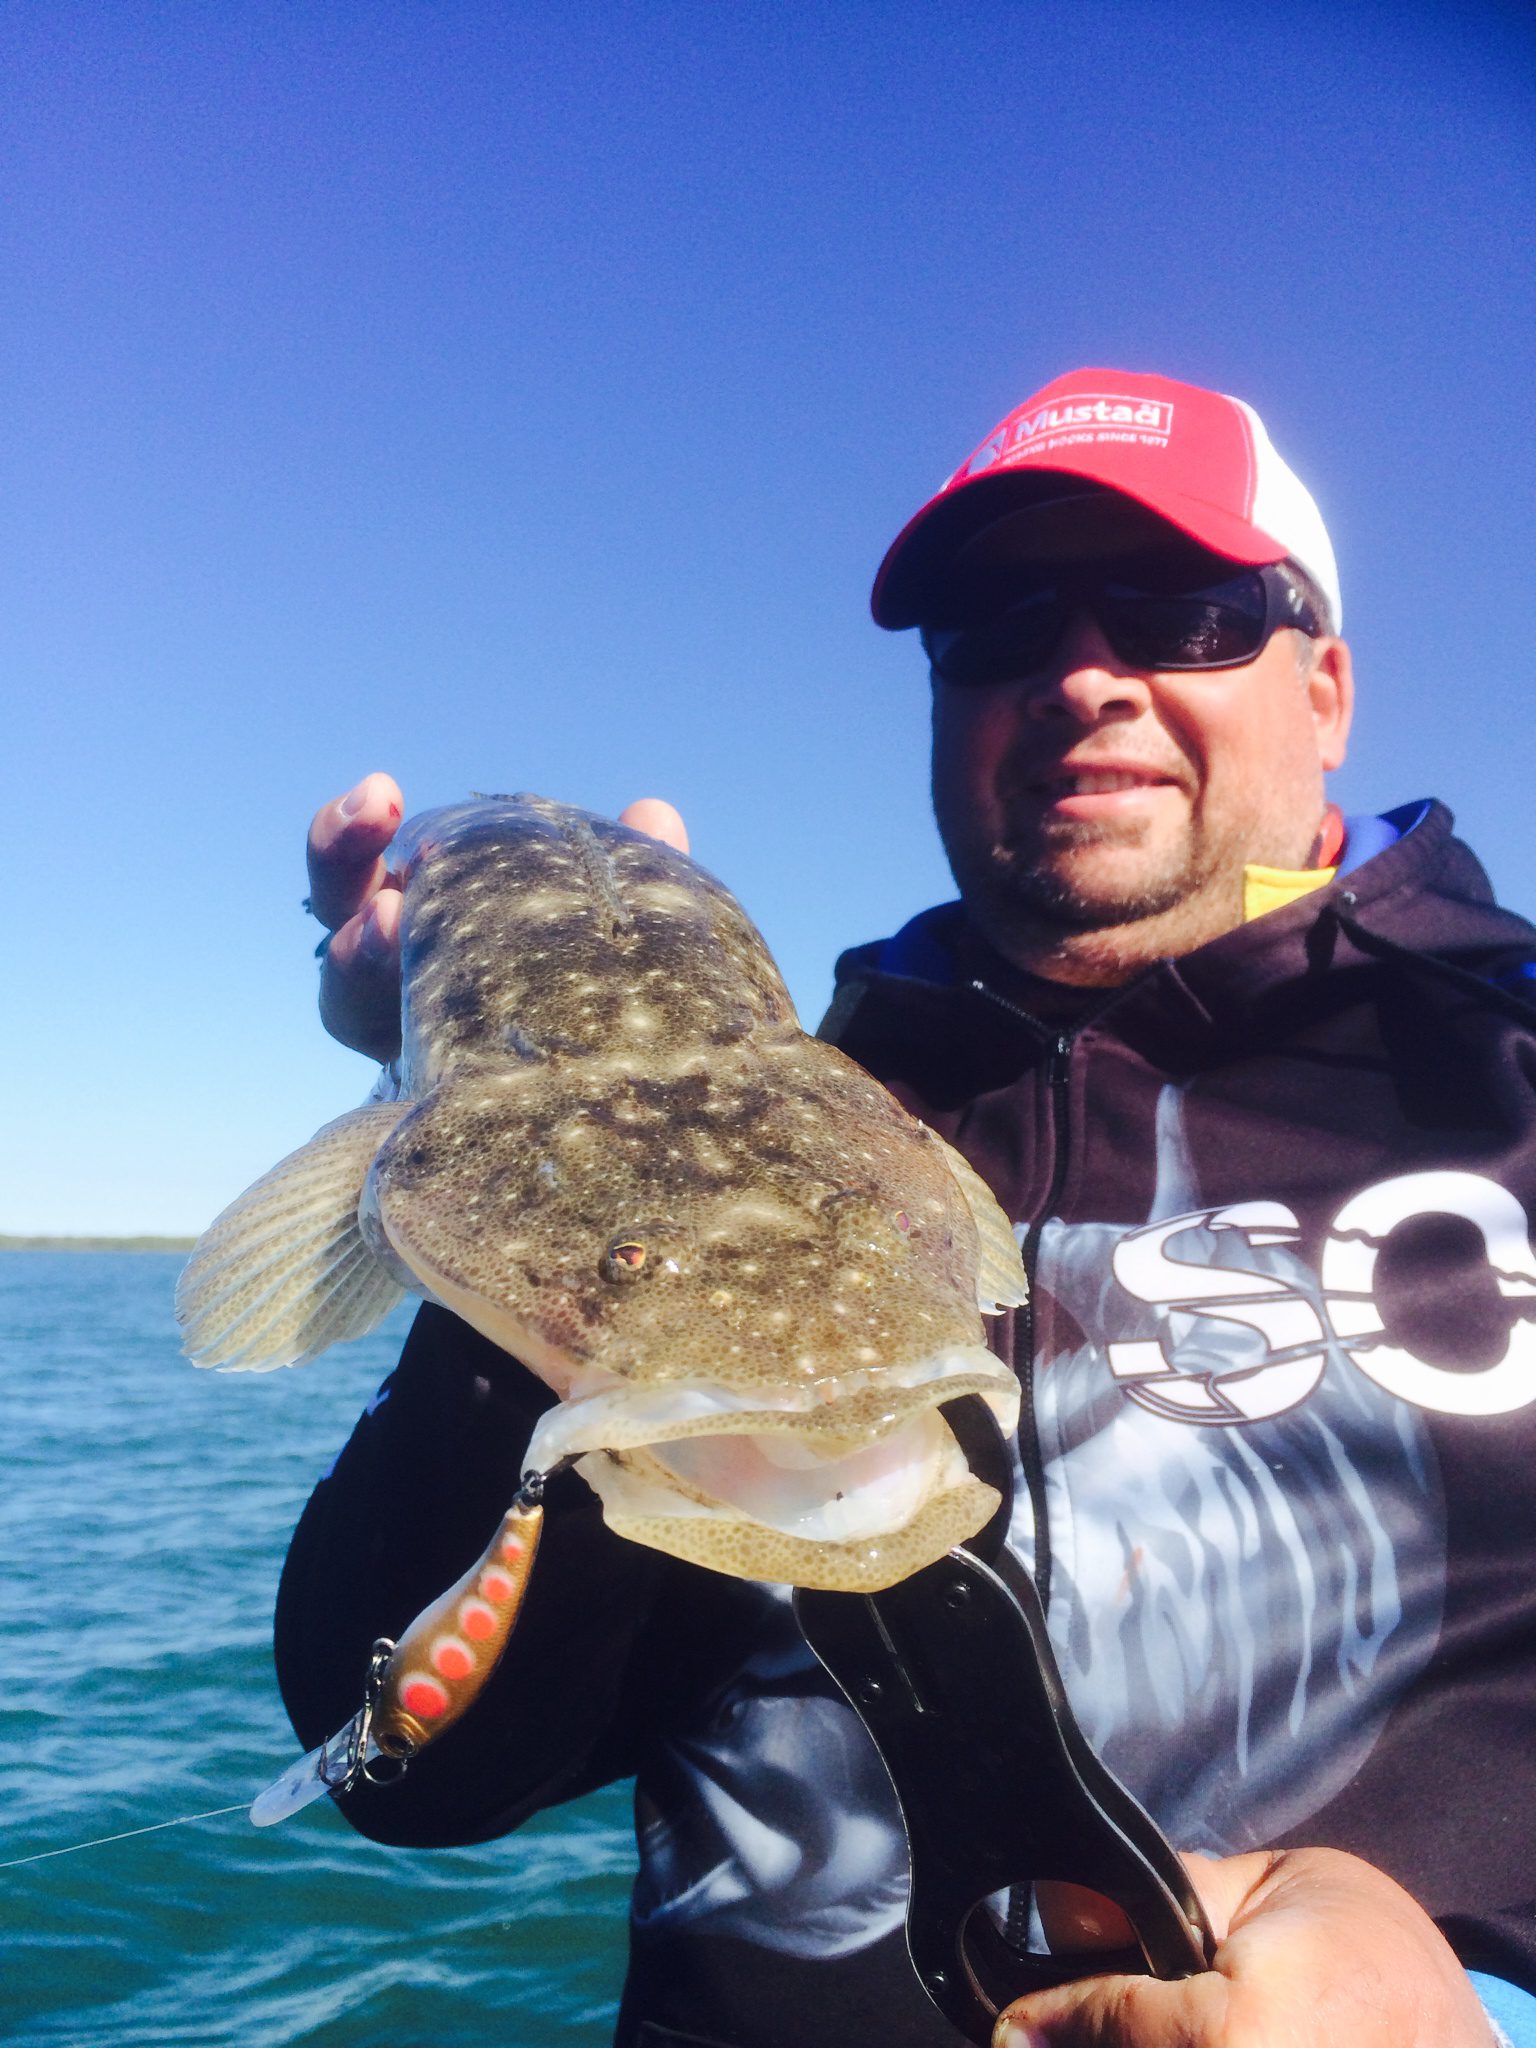 Troy with a nice Flathead taken while trolling on a sand bank at high tide on one of the new zerek tango shads.